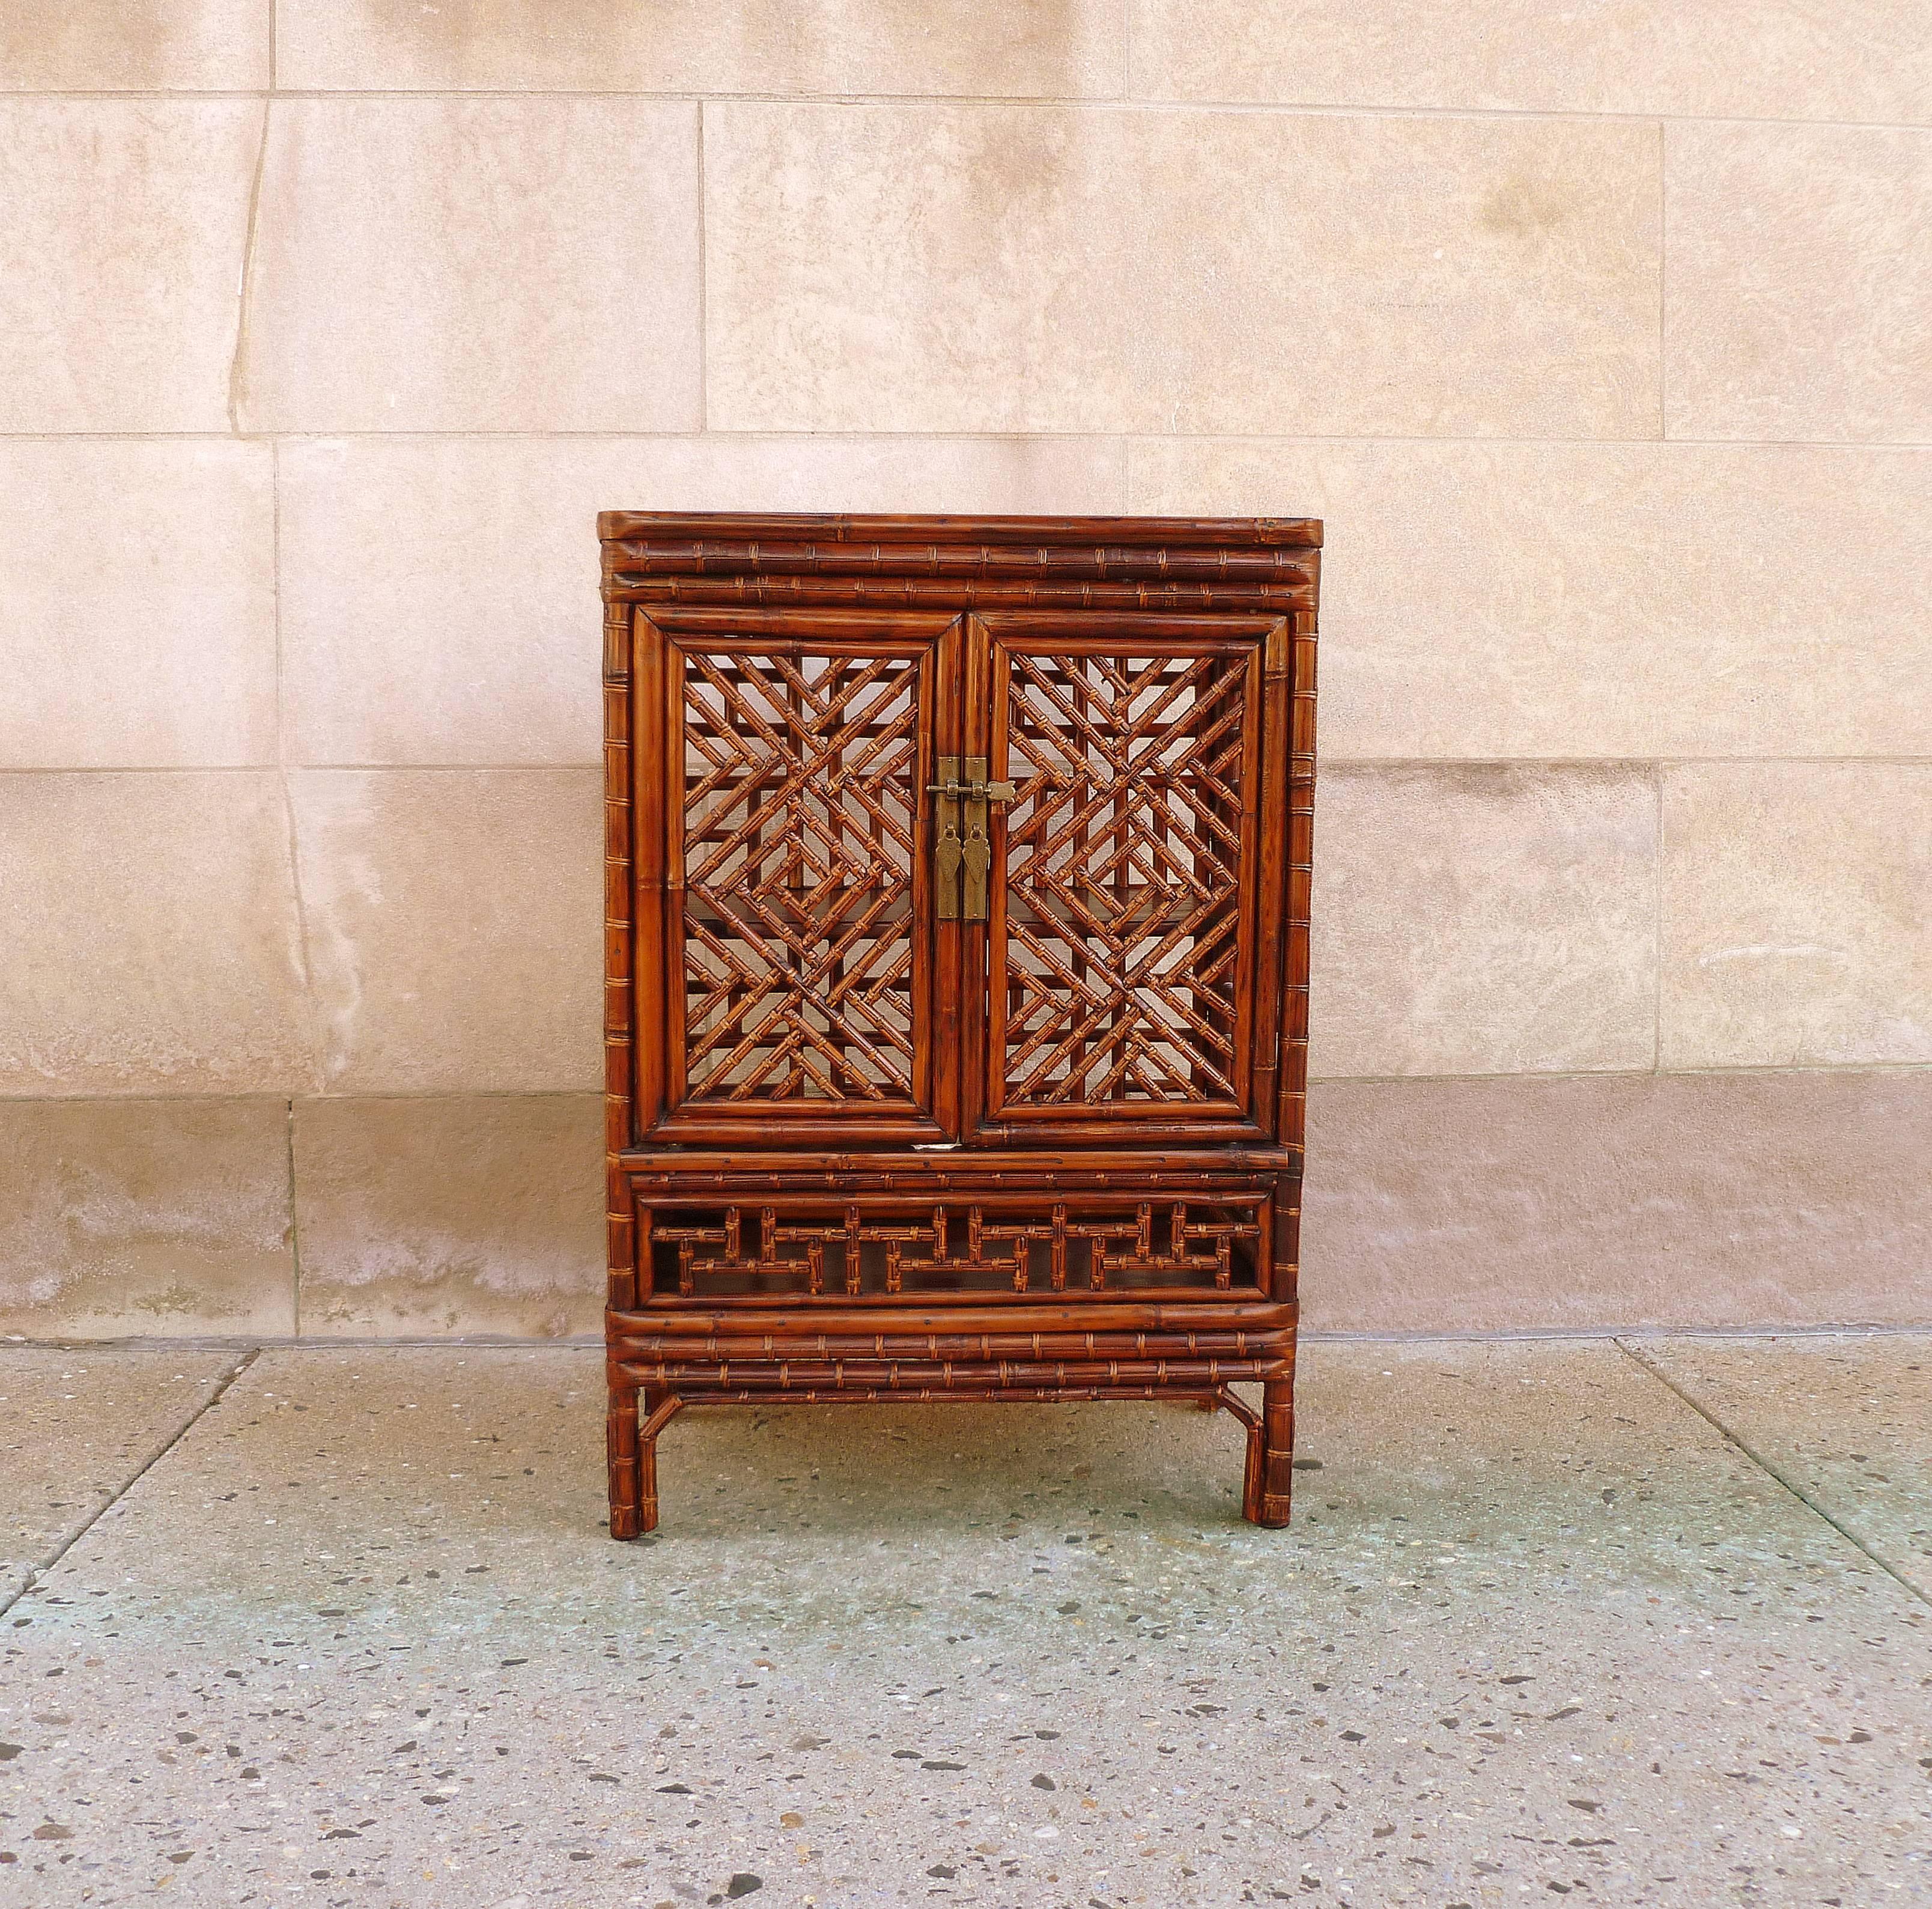 Bamboo chest with lattice fret work on the pair of doors and sides, fine workmanship.